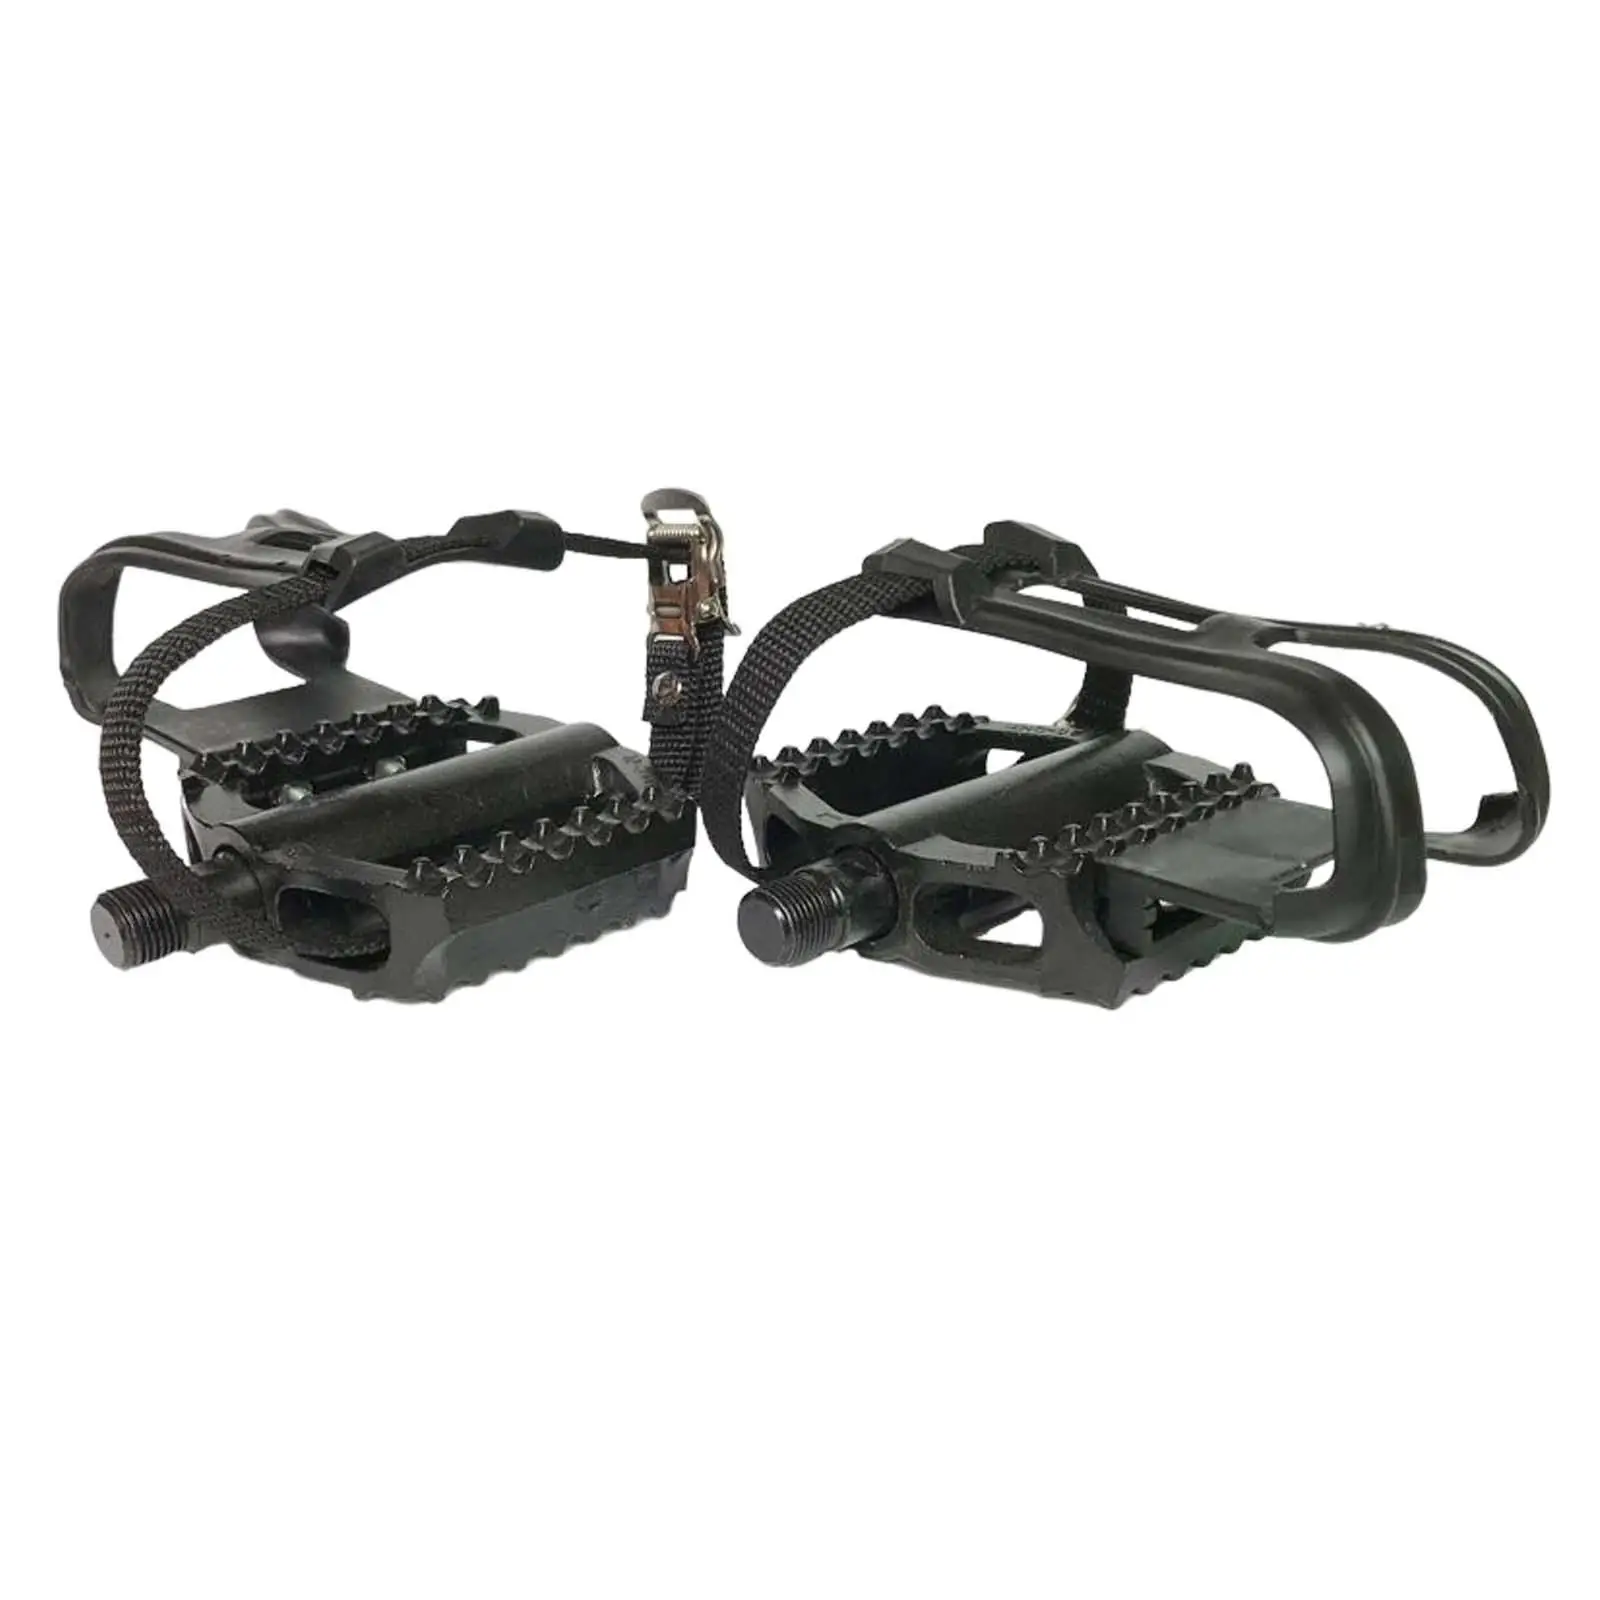 1 Pair Exercise Bike Pedals W/ Adjustable Straps 18mm Axle Platform Pedals Nonslip for Gym Cycling Indoor Parts Replacement